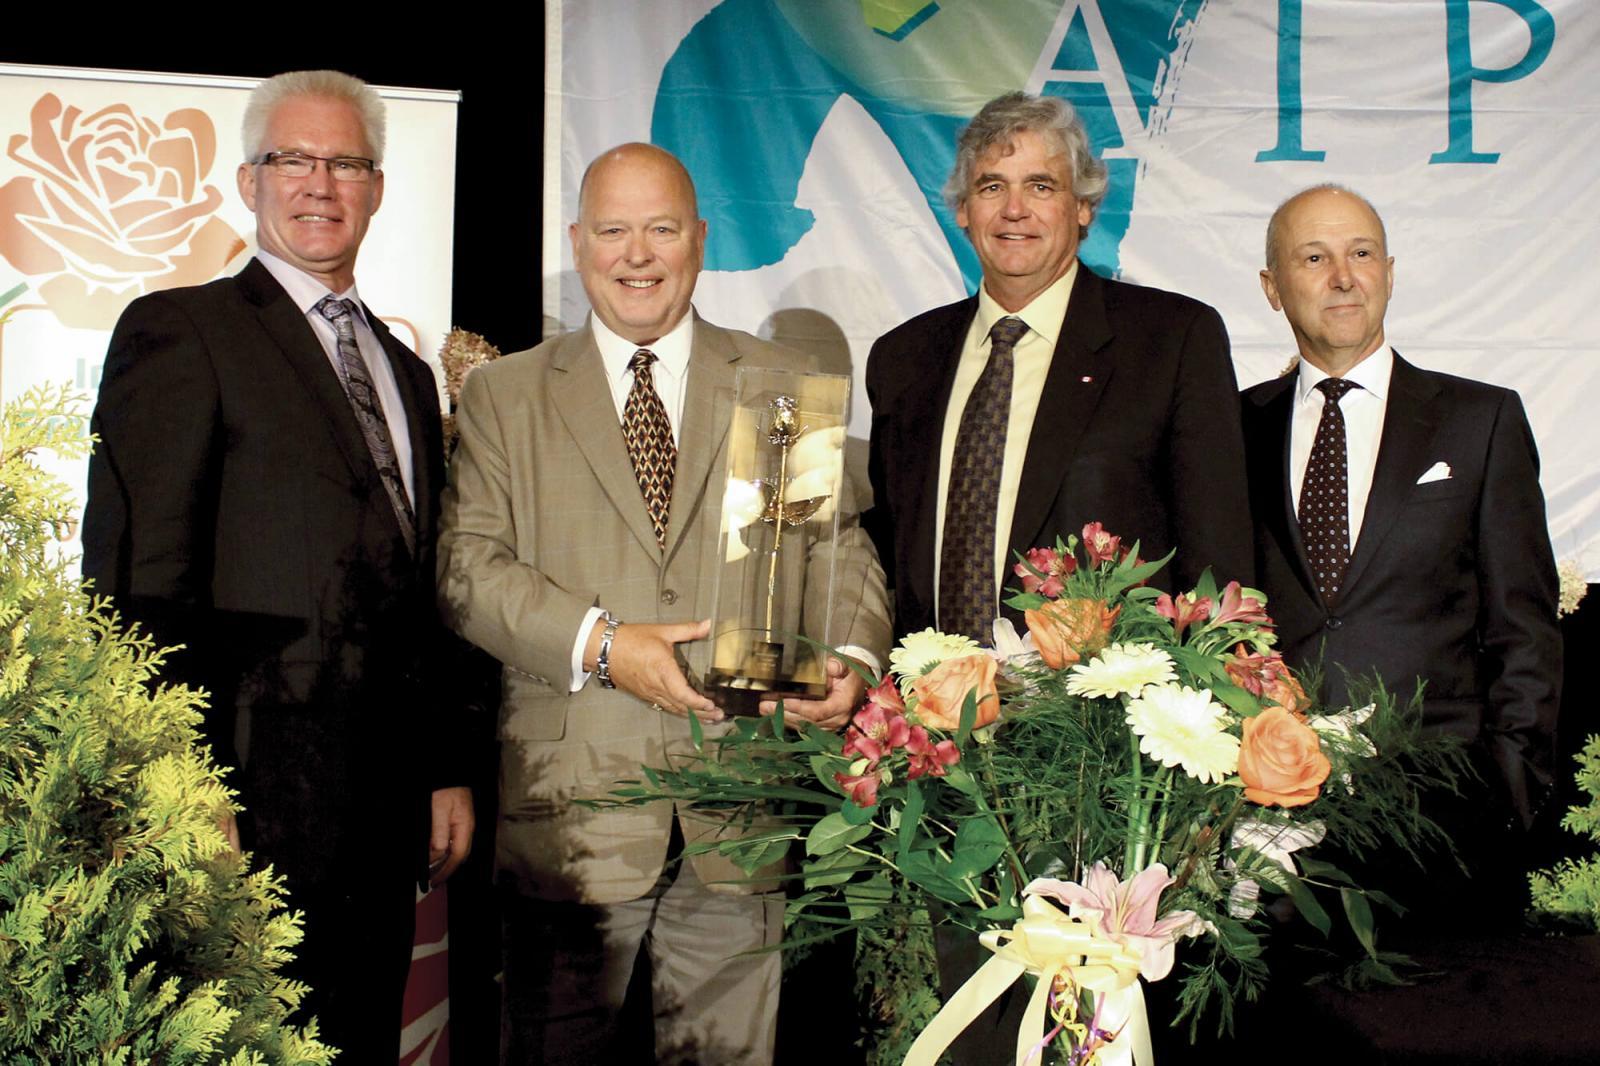 For the second consecutive year, Sheridan Nurseries received the AIPH world grower of the year award. In photo, from left, Vic Krahn, president of AIPH, Karl and Bill Stensson accepting the award on behalf of Sheridan and LO president Phil Charal.